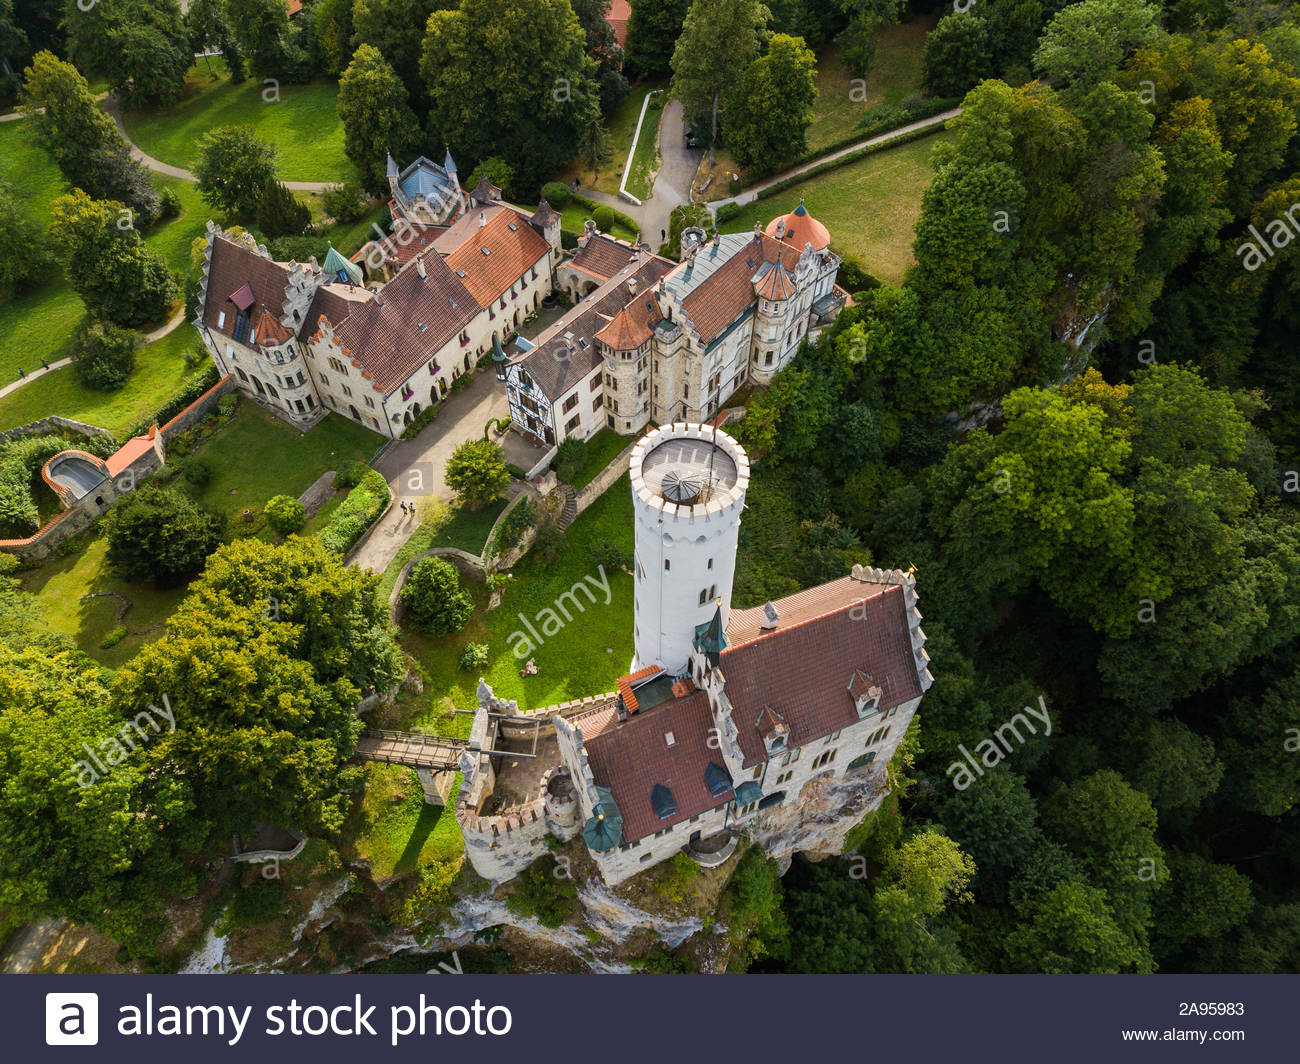 aerial-view-of-lichtenstein-castle-in-cloudy-weather-germany-in-the-summer-2A95983.jpg